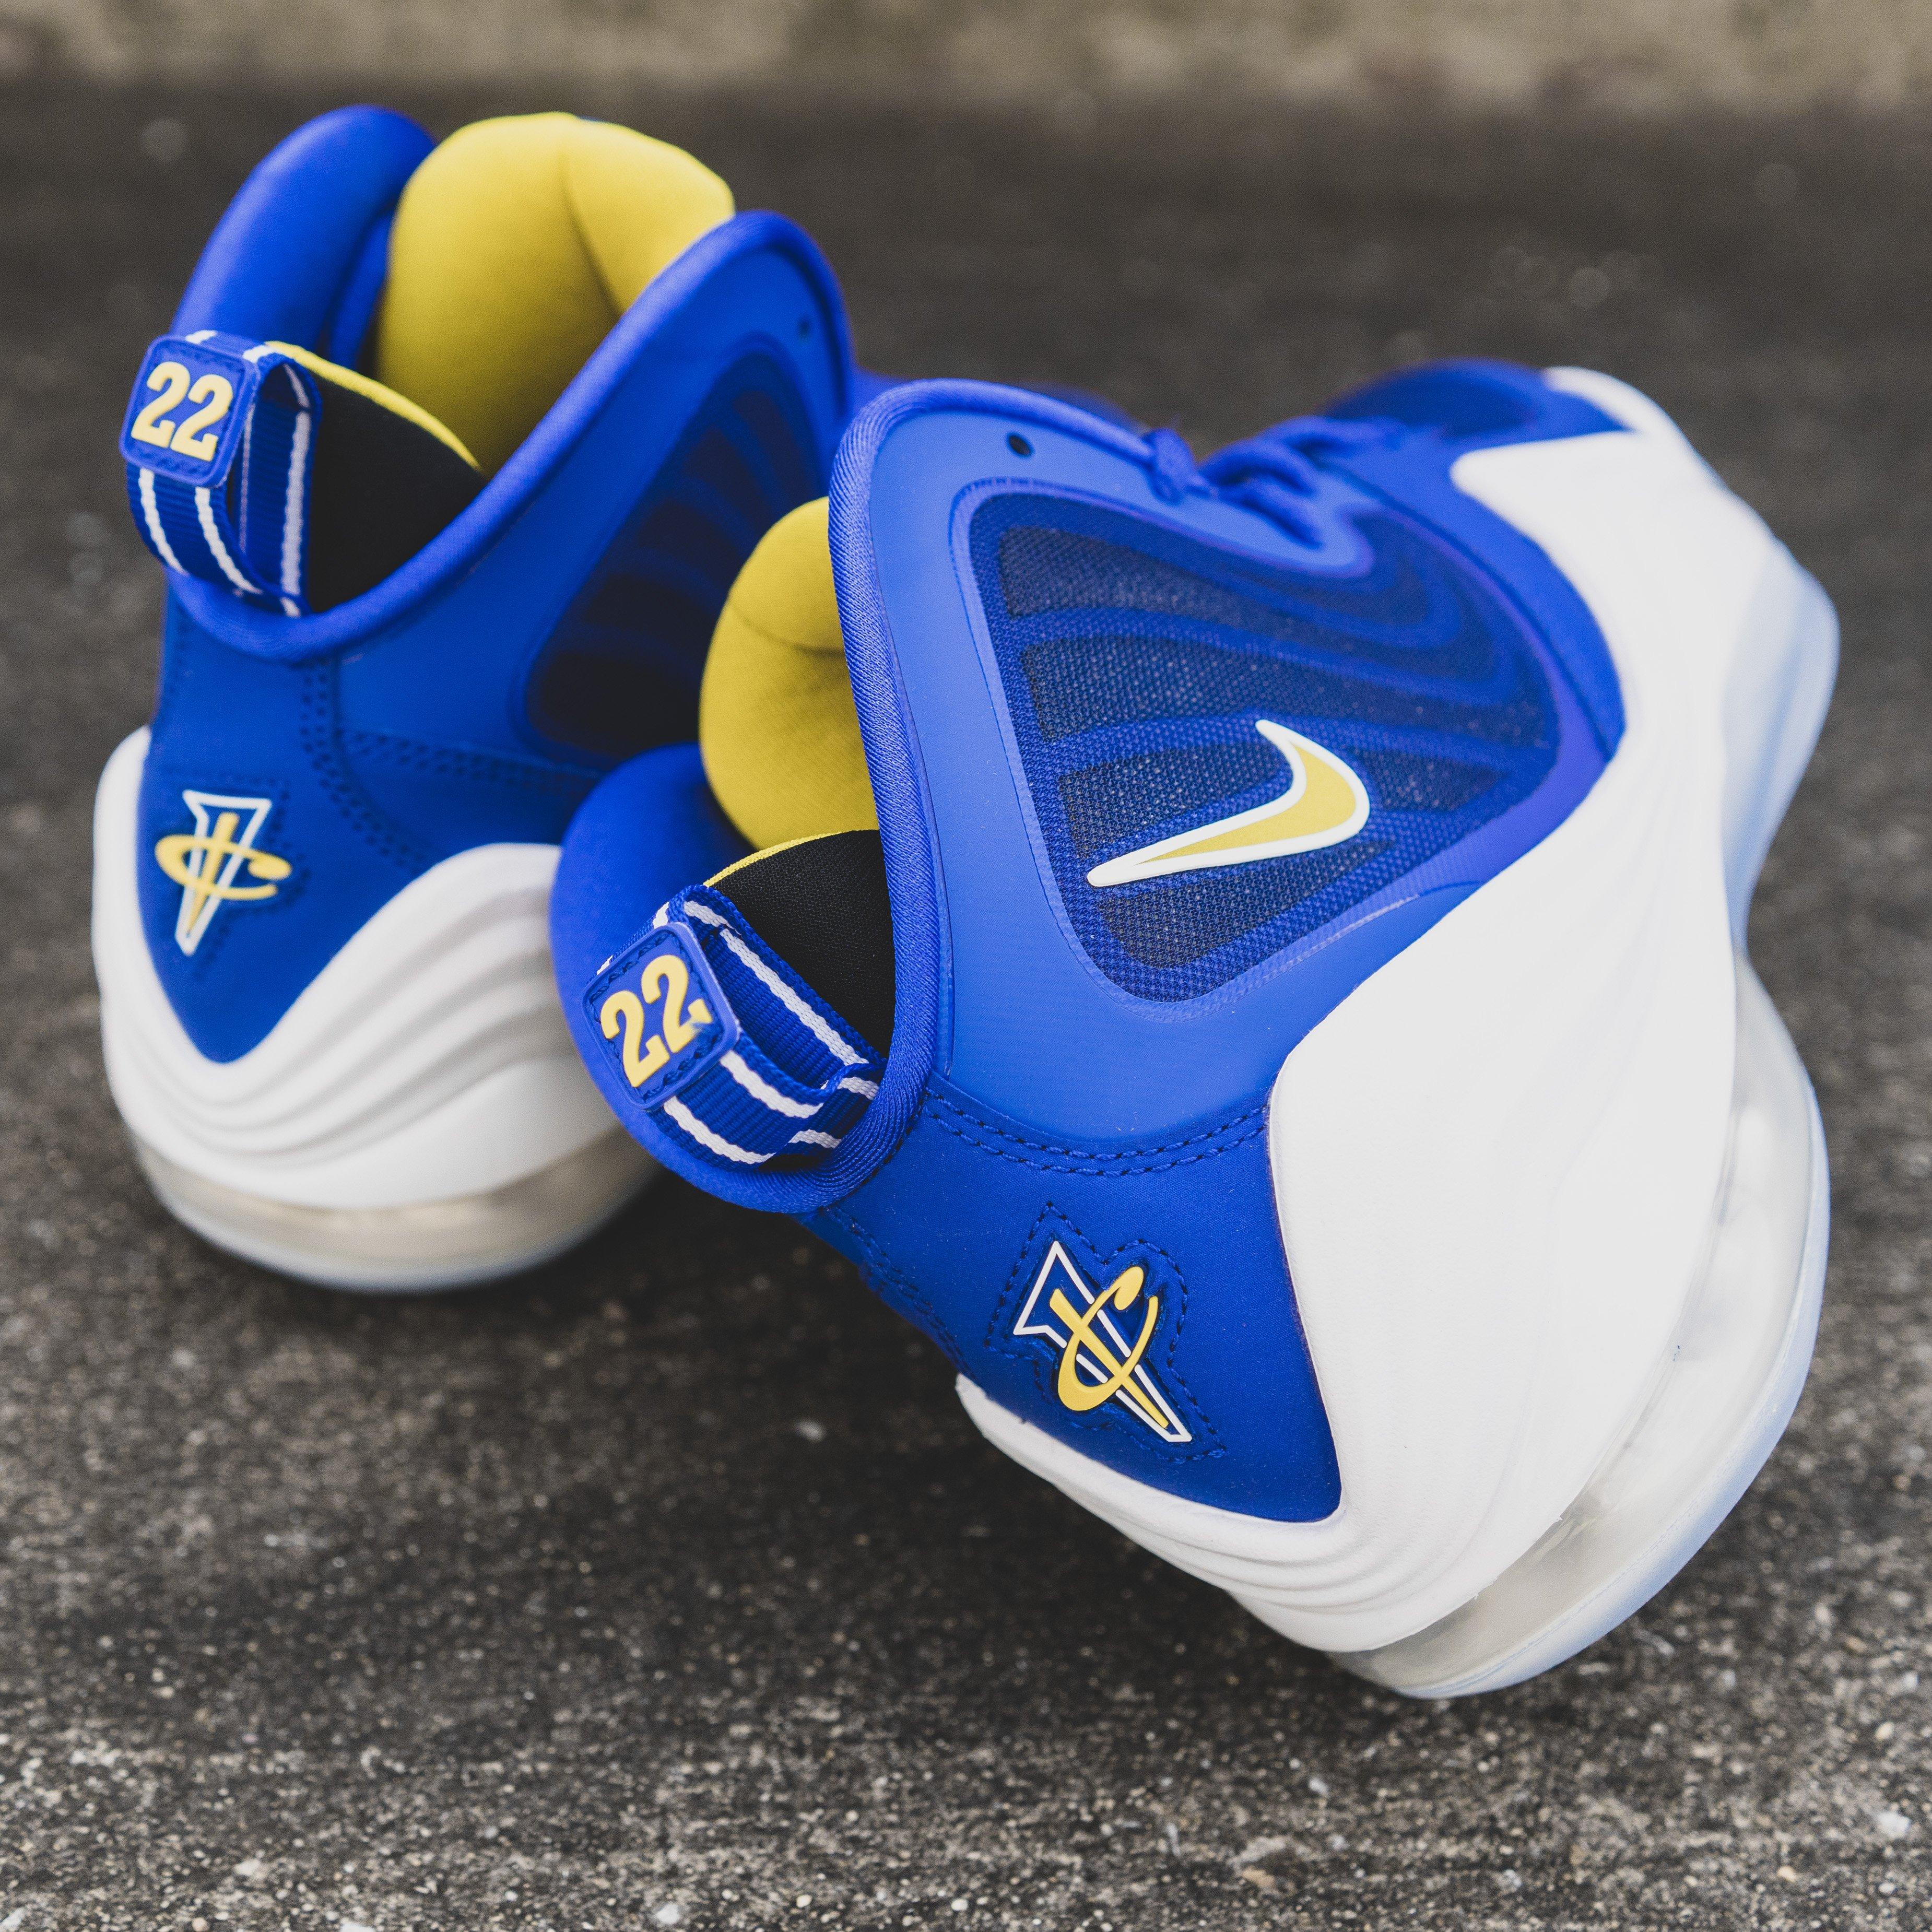 air penny 5 blue chips